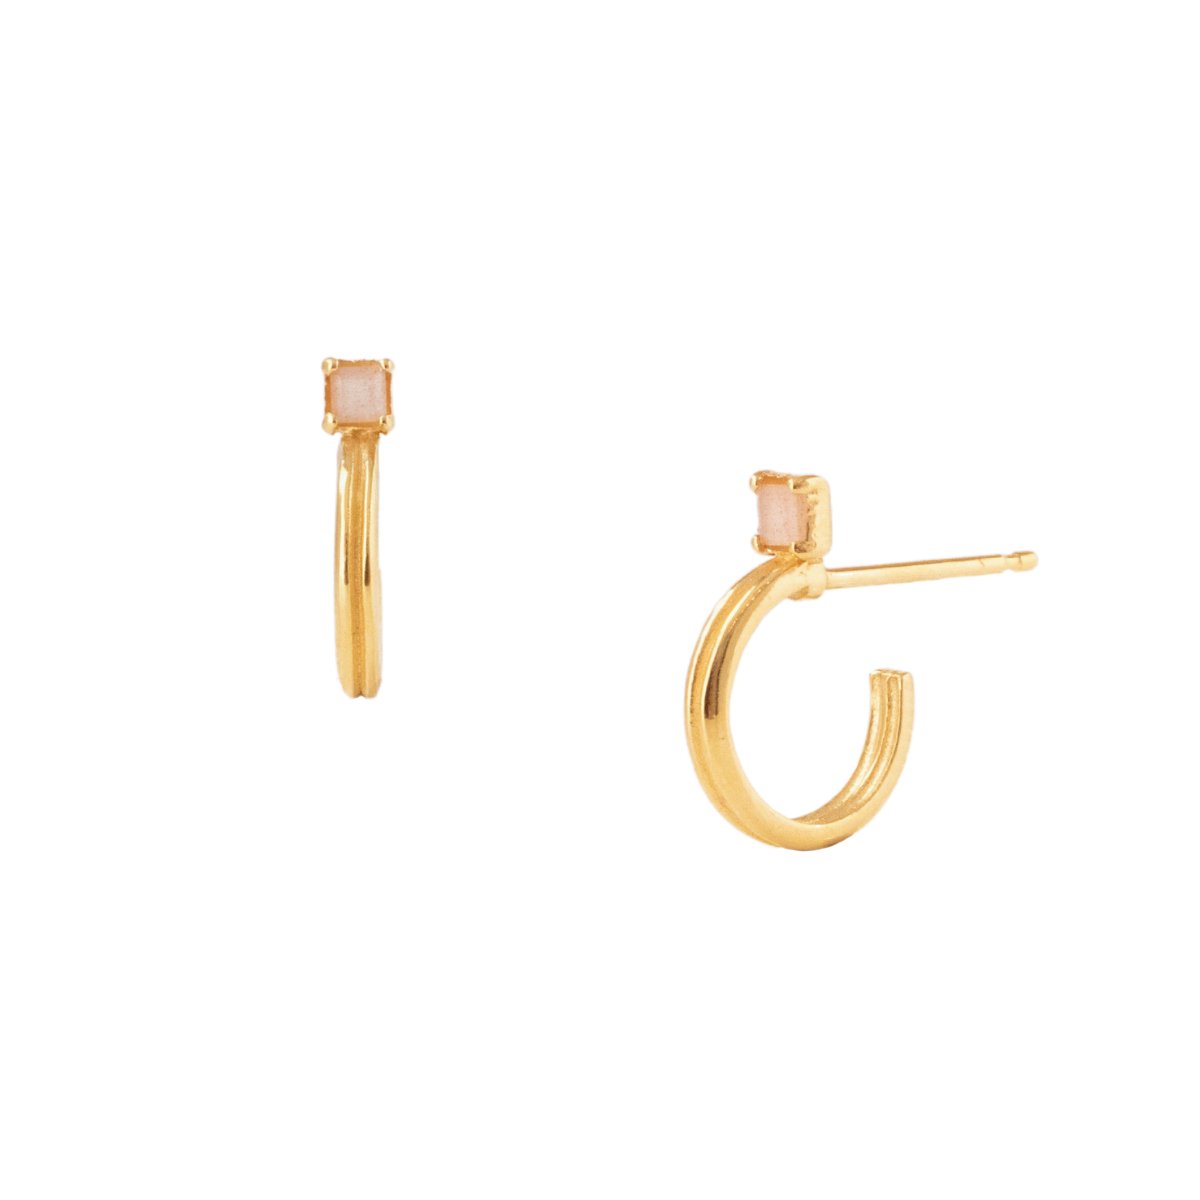 RADIANT ARC HUGGIE HOOPS - PEACH MOONSTONE & GOLD - SO PRETTY CARA COTTER